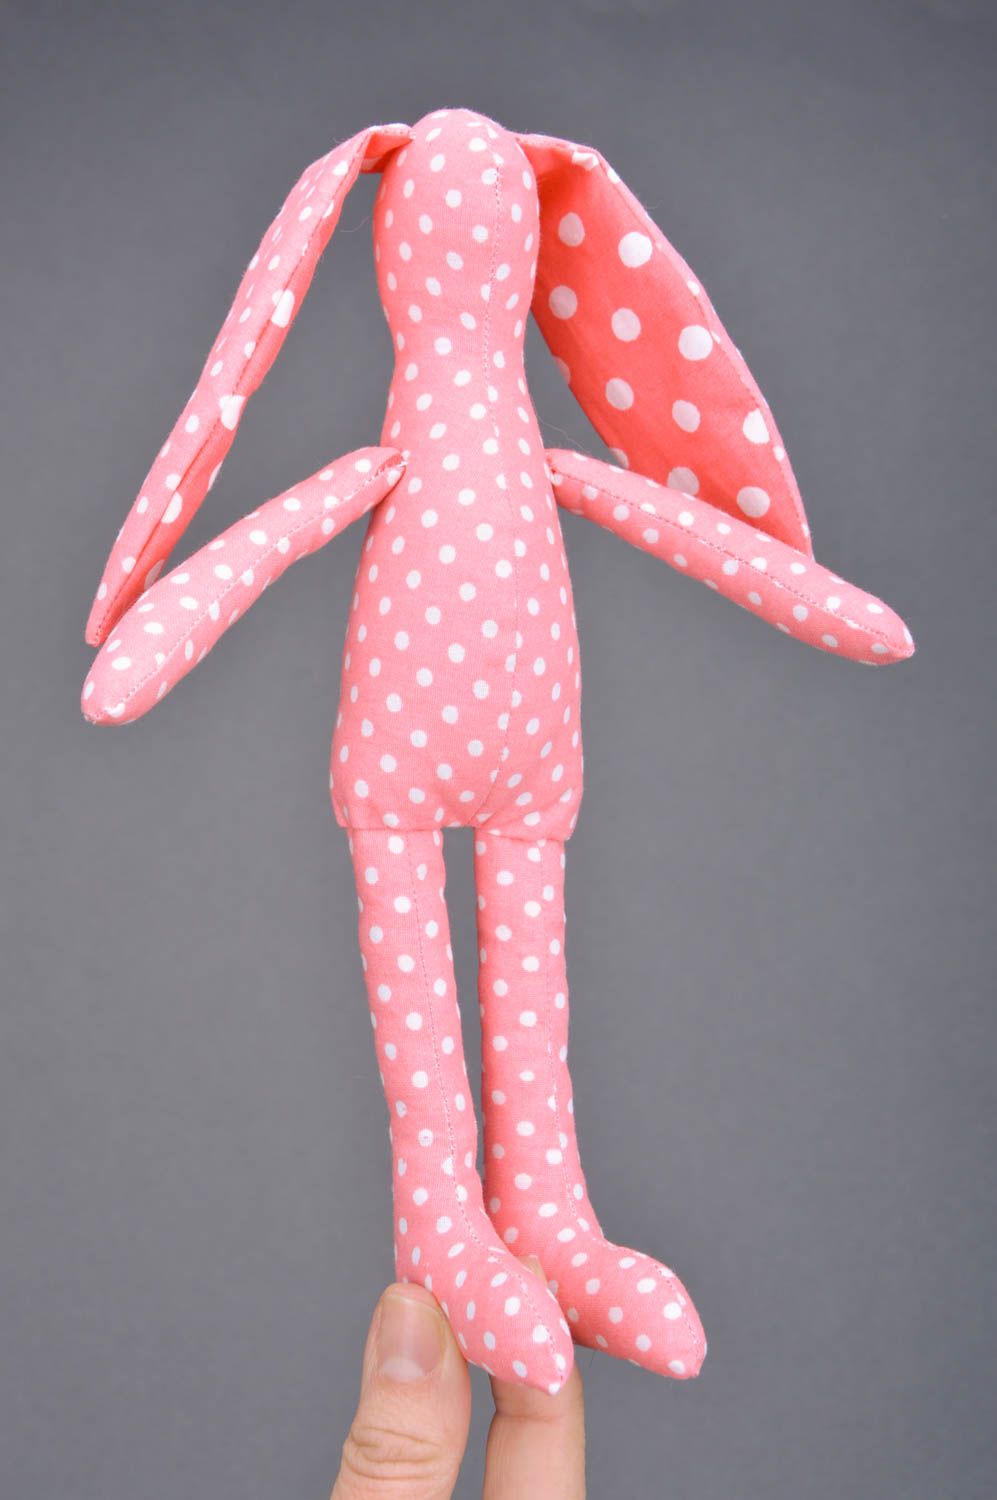 Handmade decorative pink soft toy cotton bunny with polka dot pattern home decor photo 3